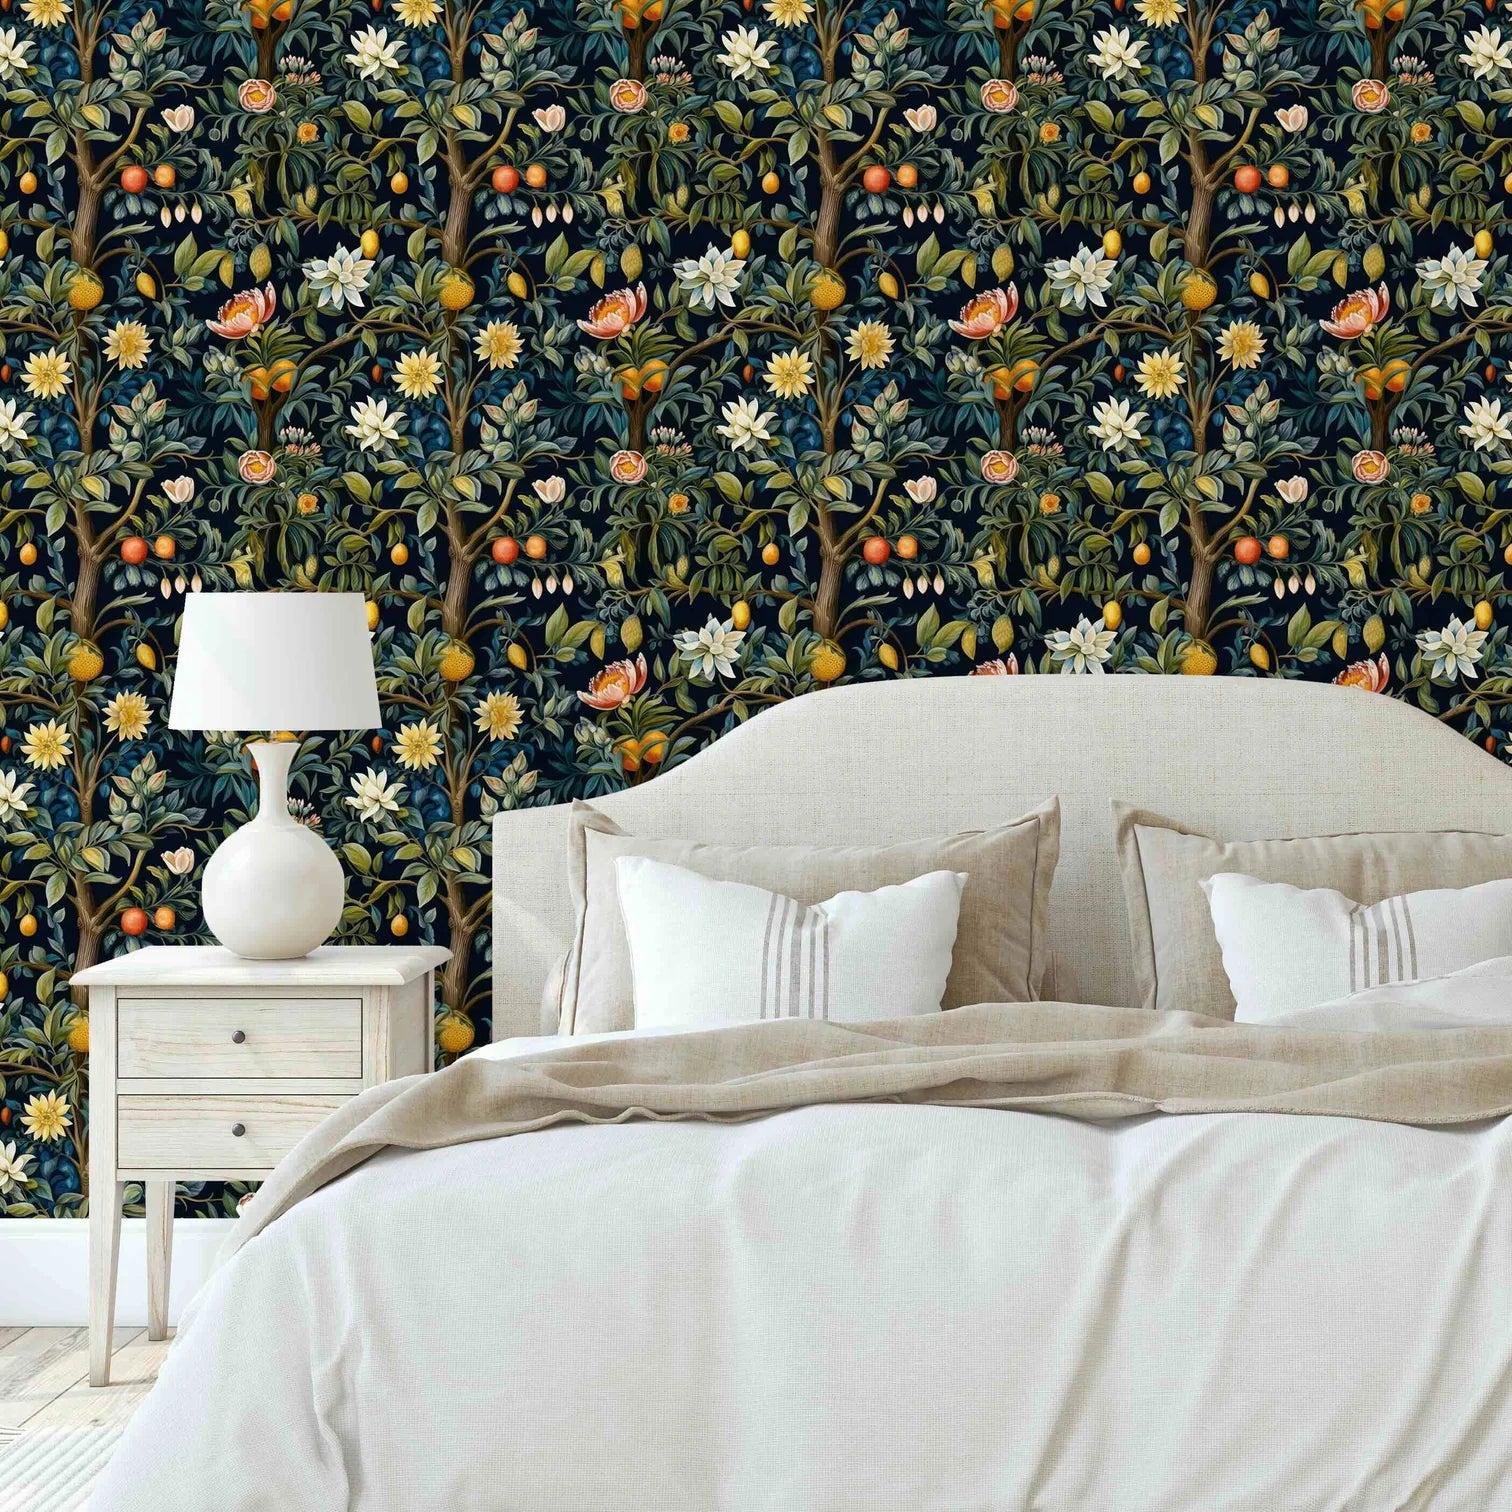 Multicolor wallpaper with a tropical pattern of foliage and fruits